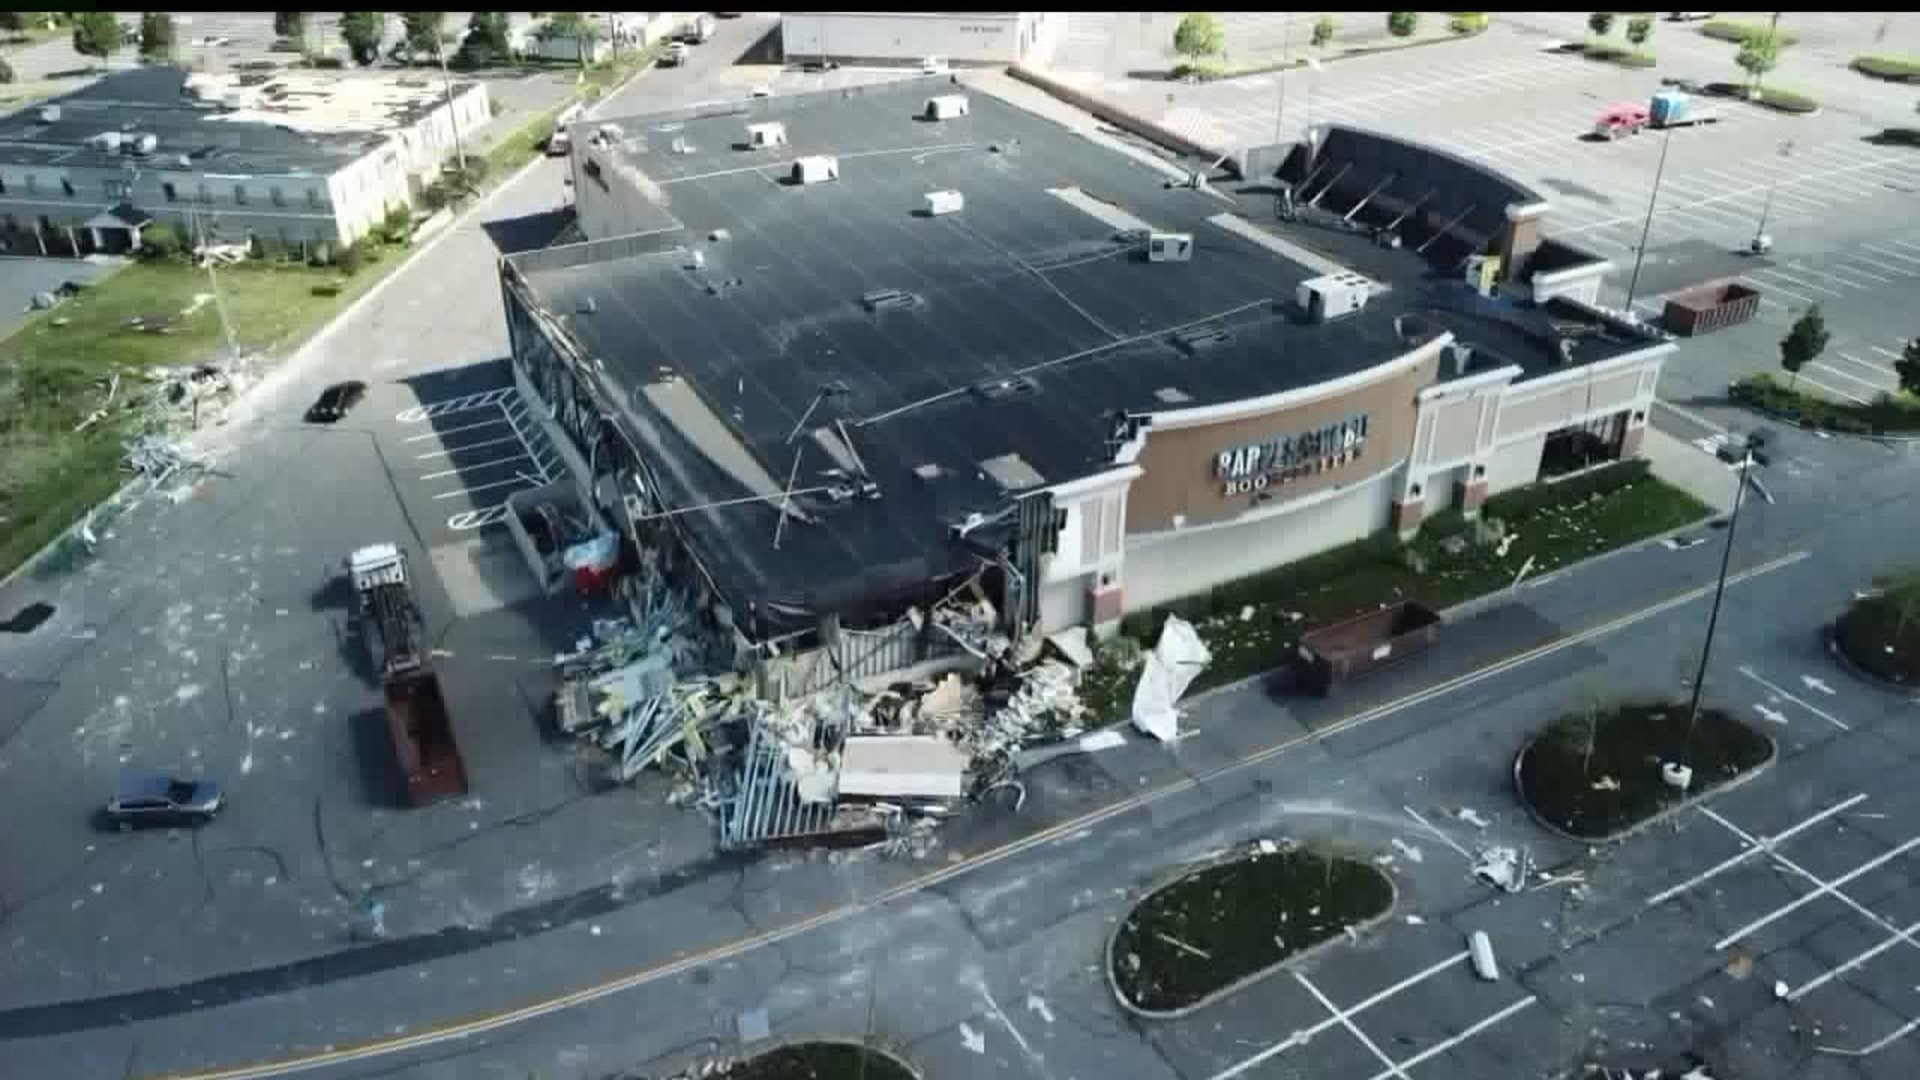 One Year Later, Businesses Slowly Recovering from Wilkes-Barre Township Tornado